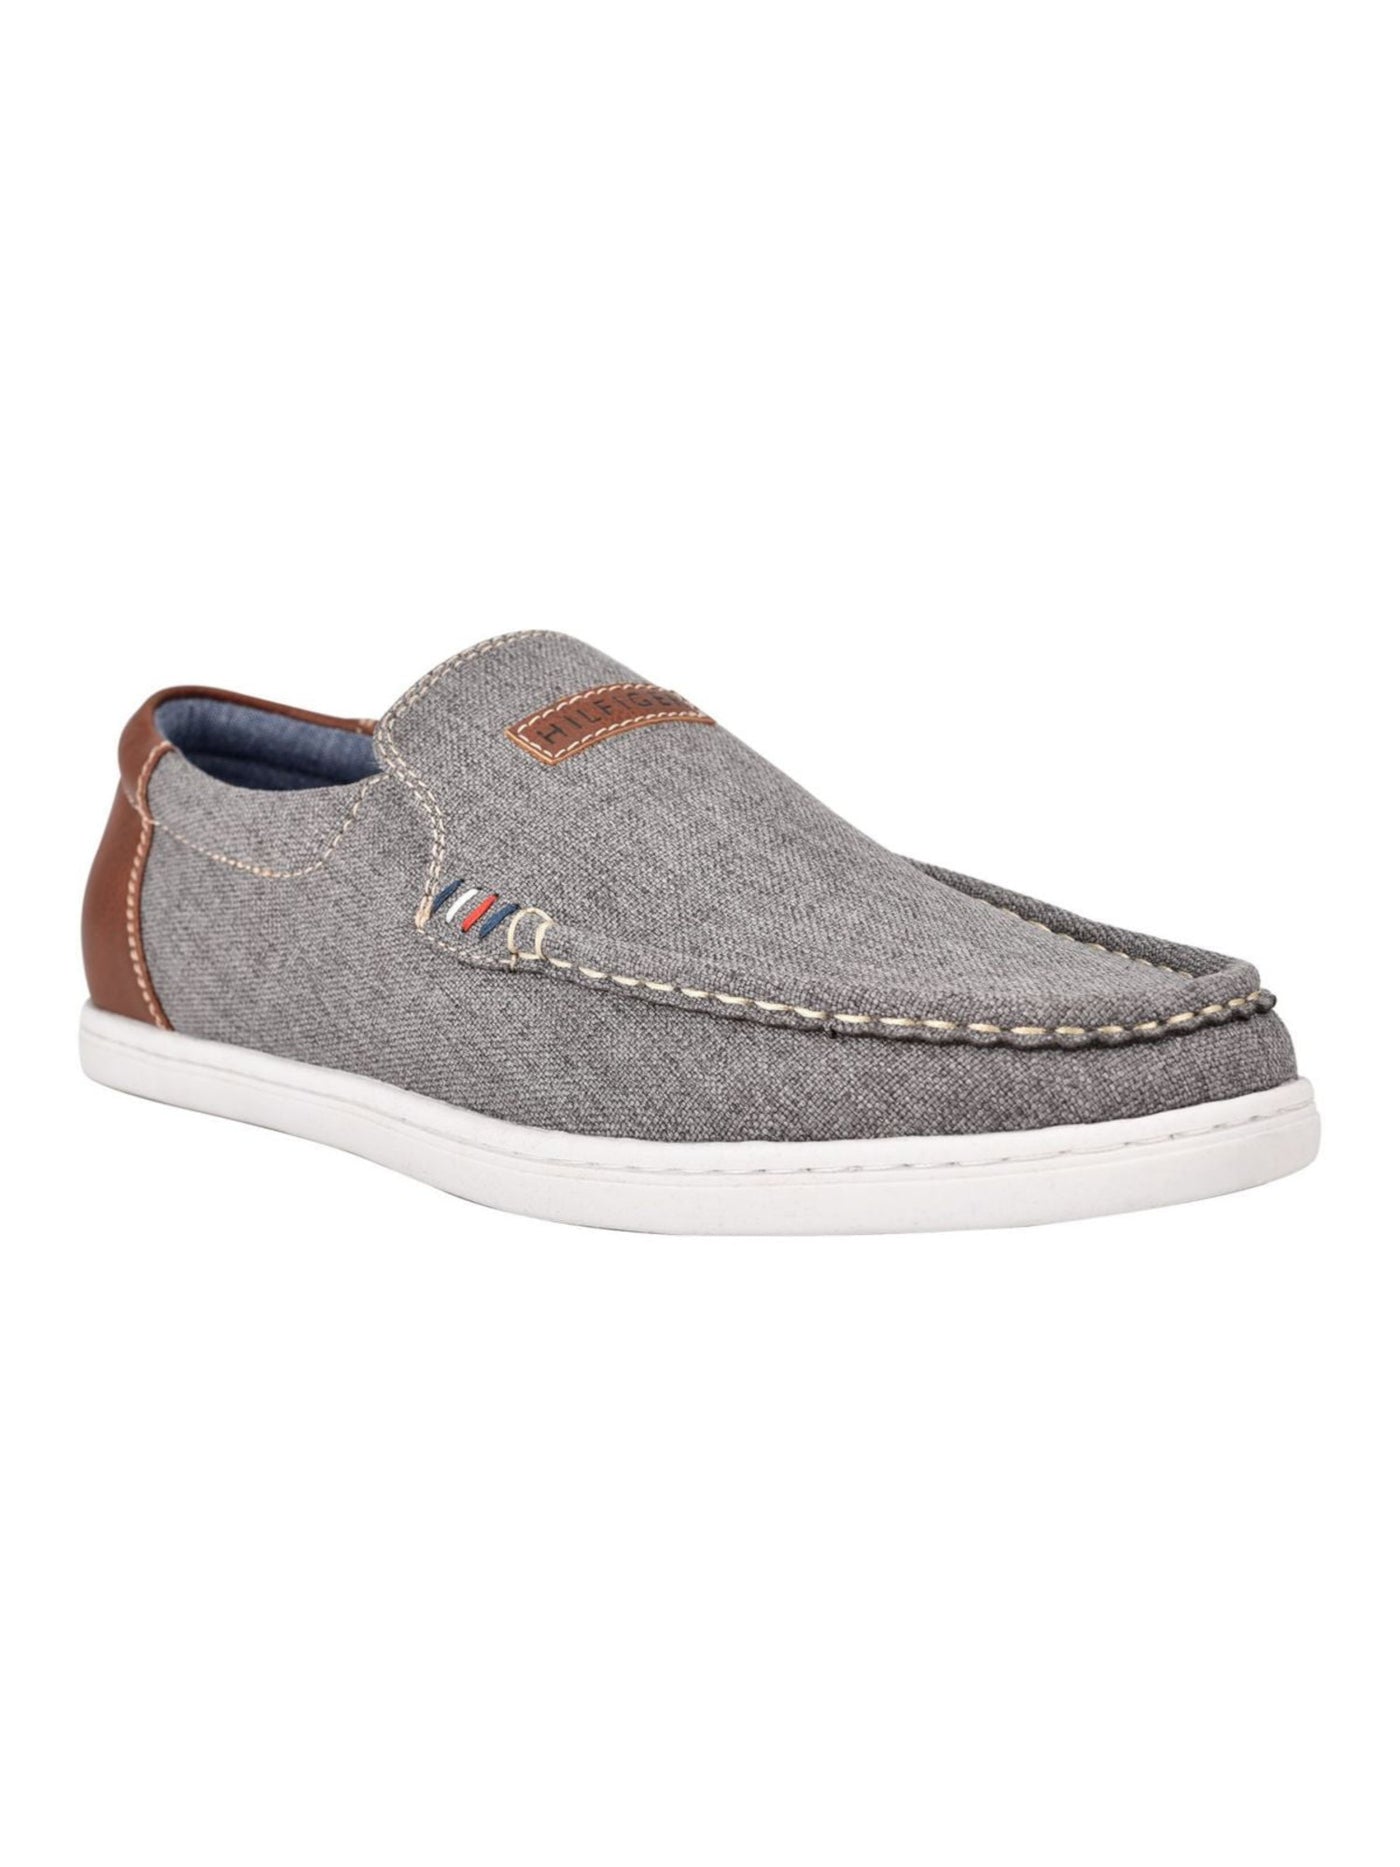 TOMMY HILFIGER Mens Gray Linen Cushioned Stretch Carlid Round Toe Slip On Sneakers Shoes 9 M